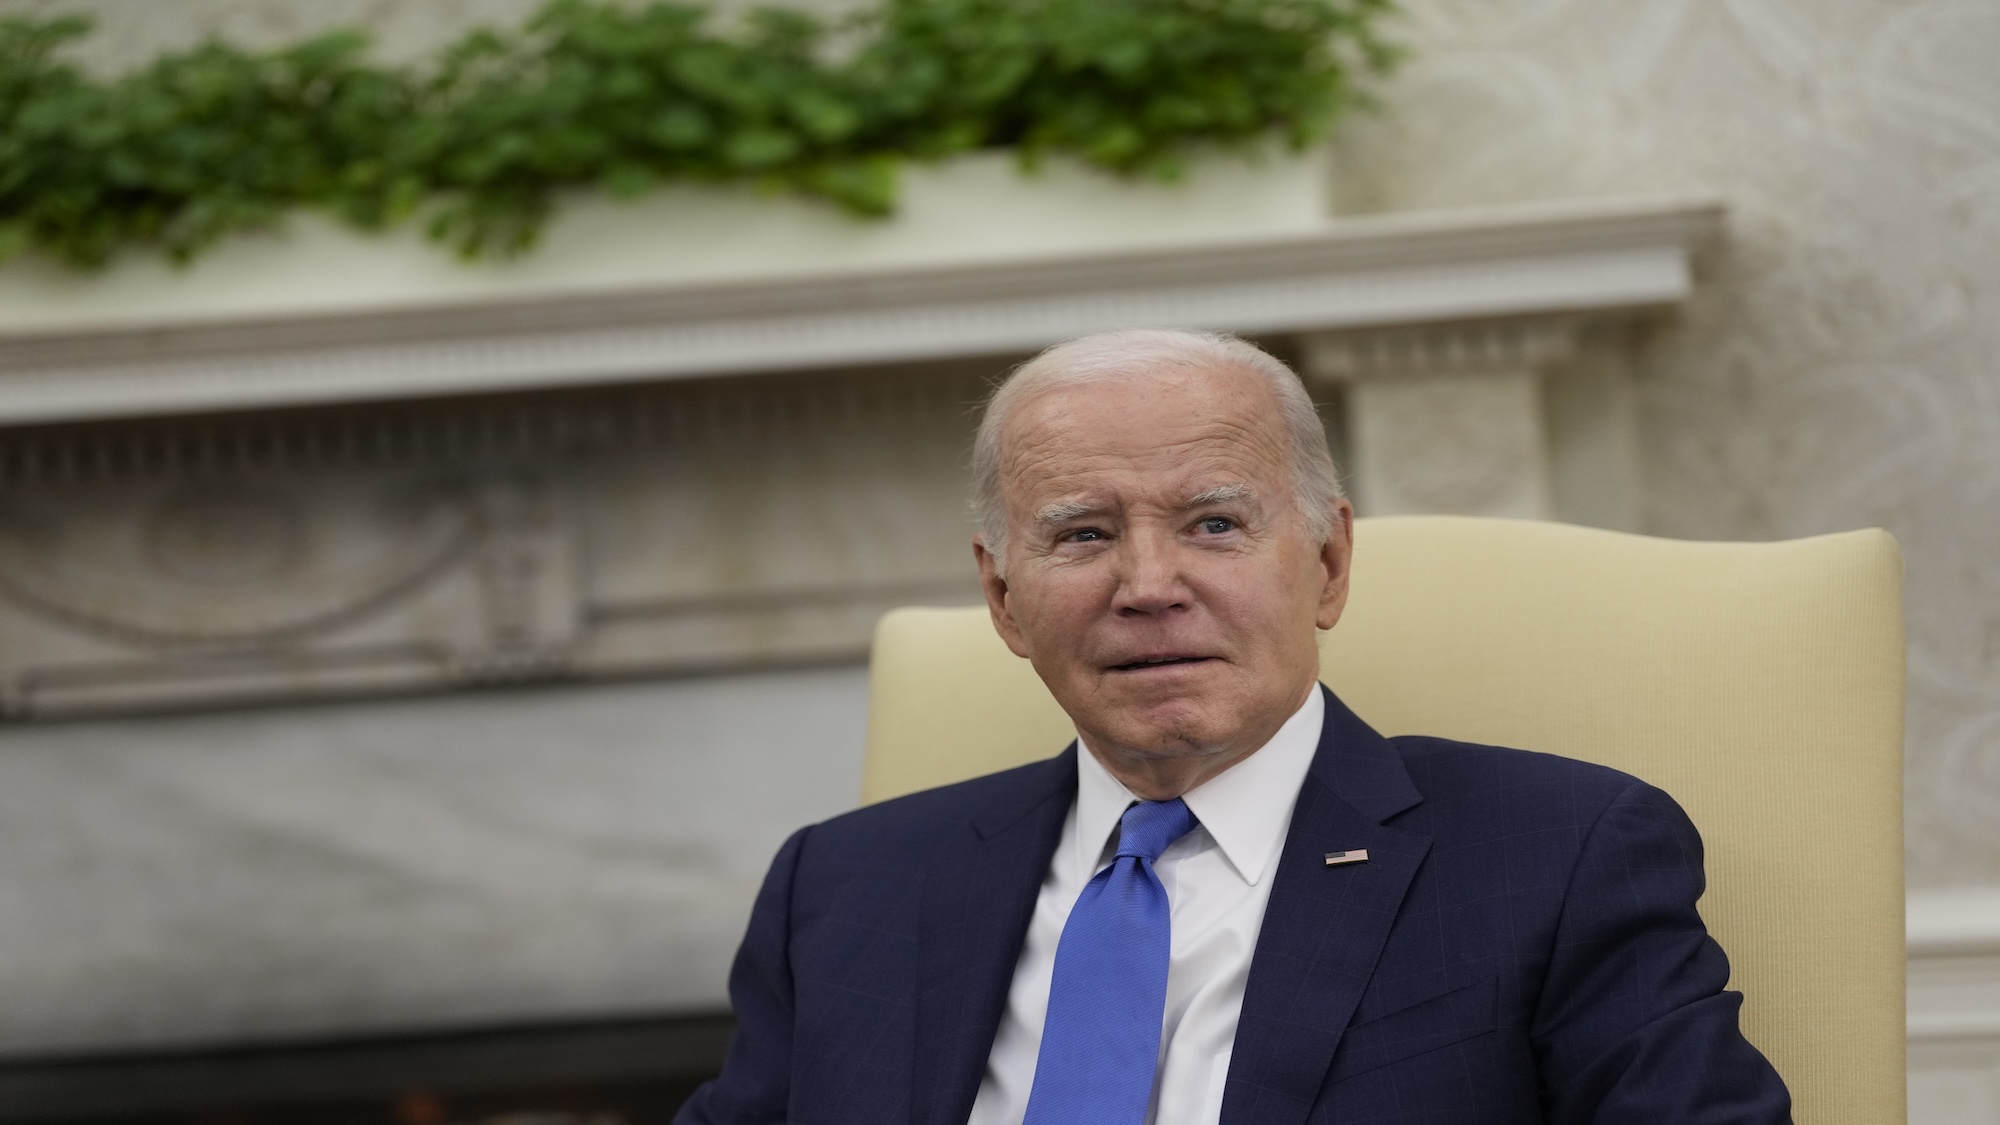  The latest poll for Biden sparks uncertainty among Democrats 